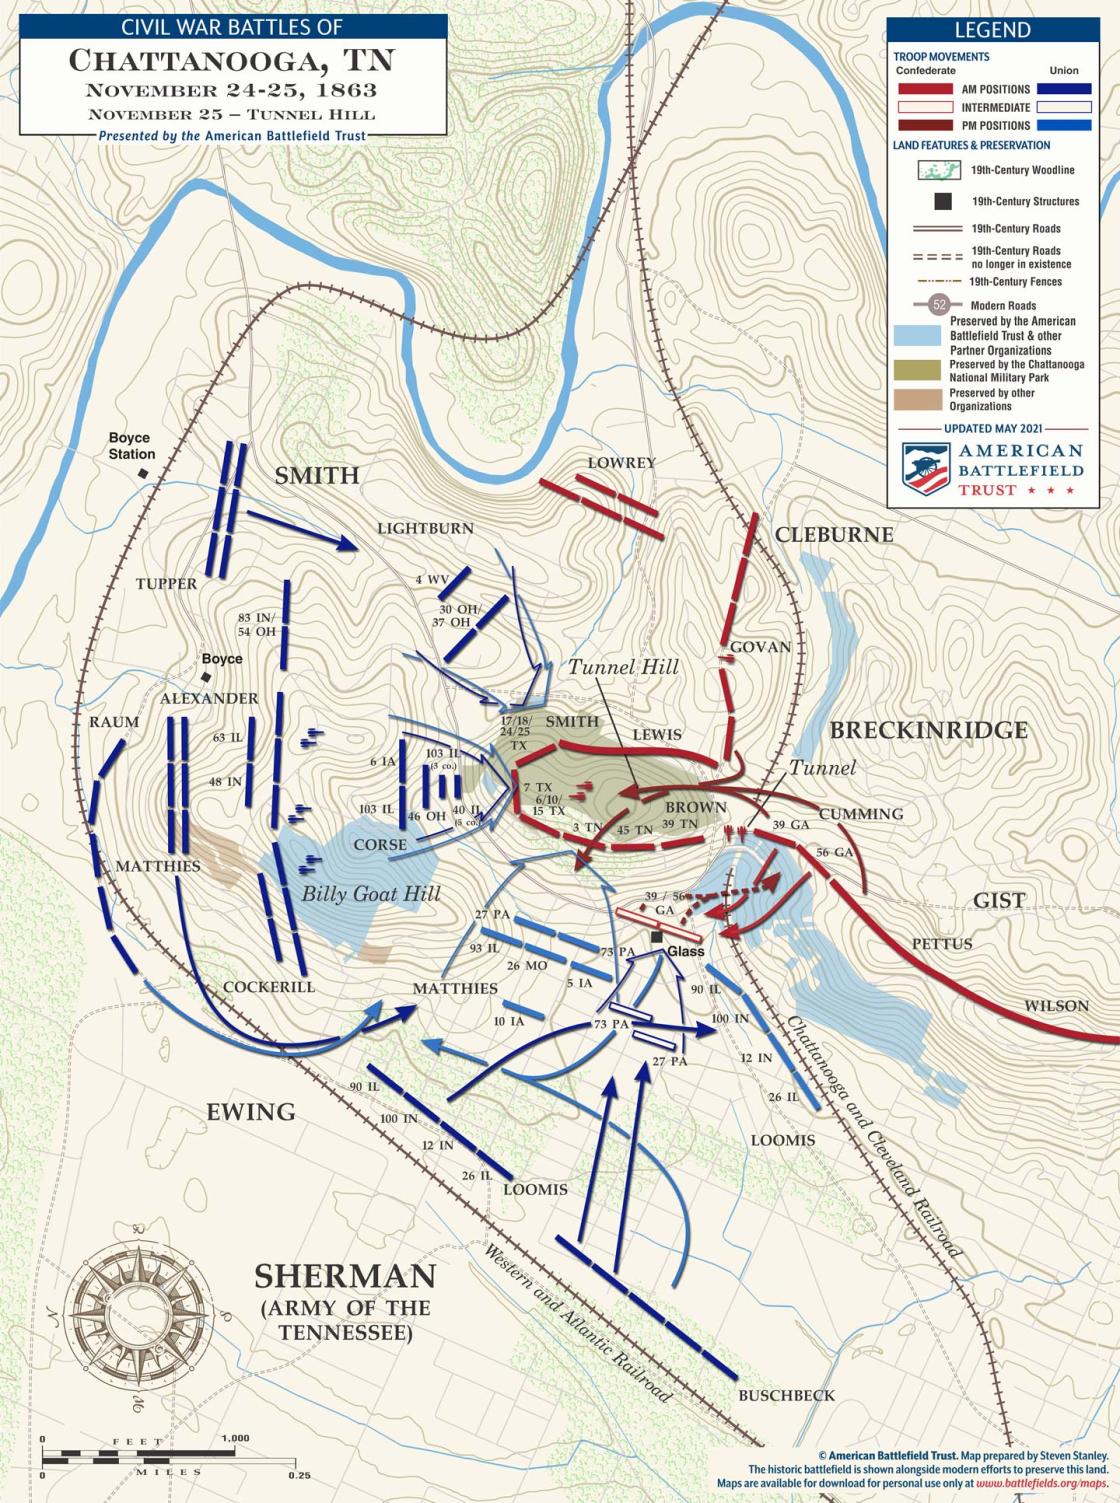 Chattanooga | Fight for Tunnel Hill | Nov 25, 1863 Battle Map